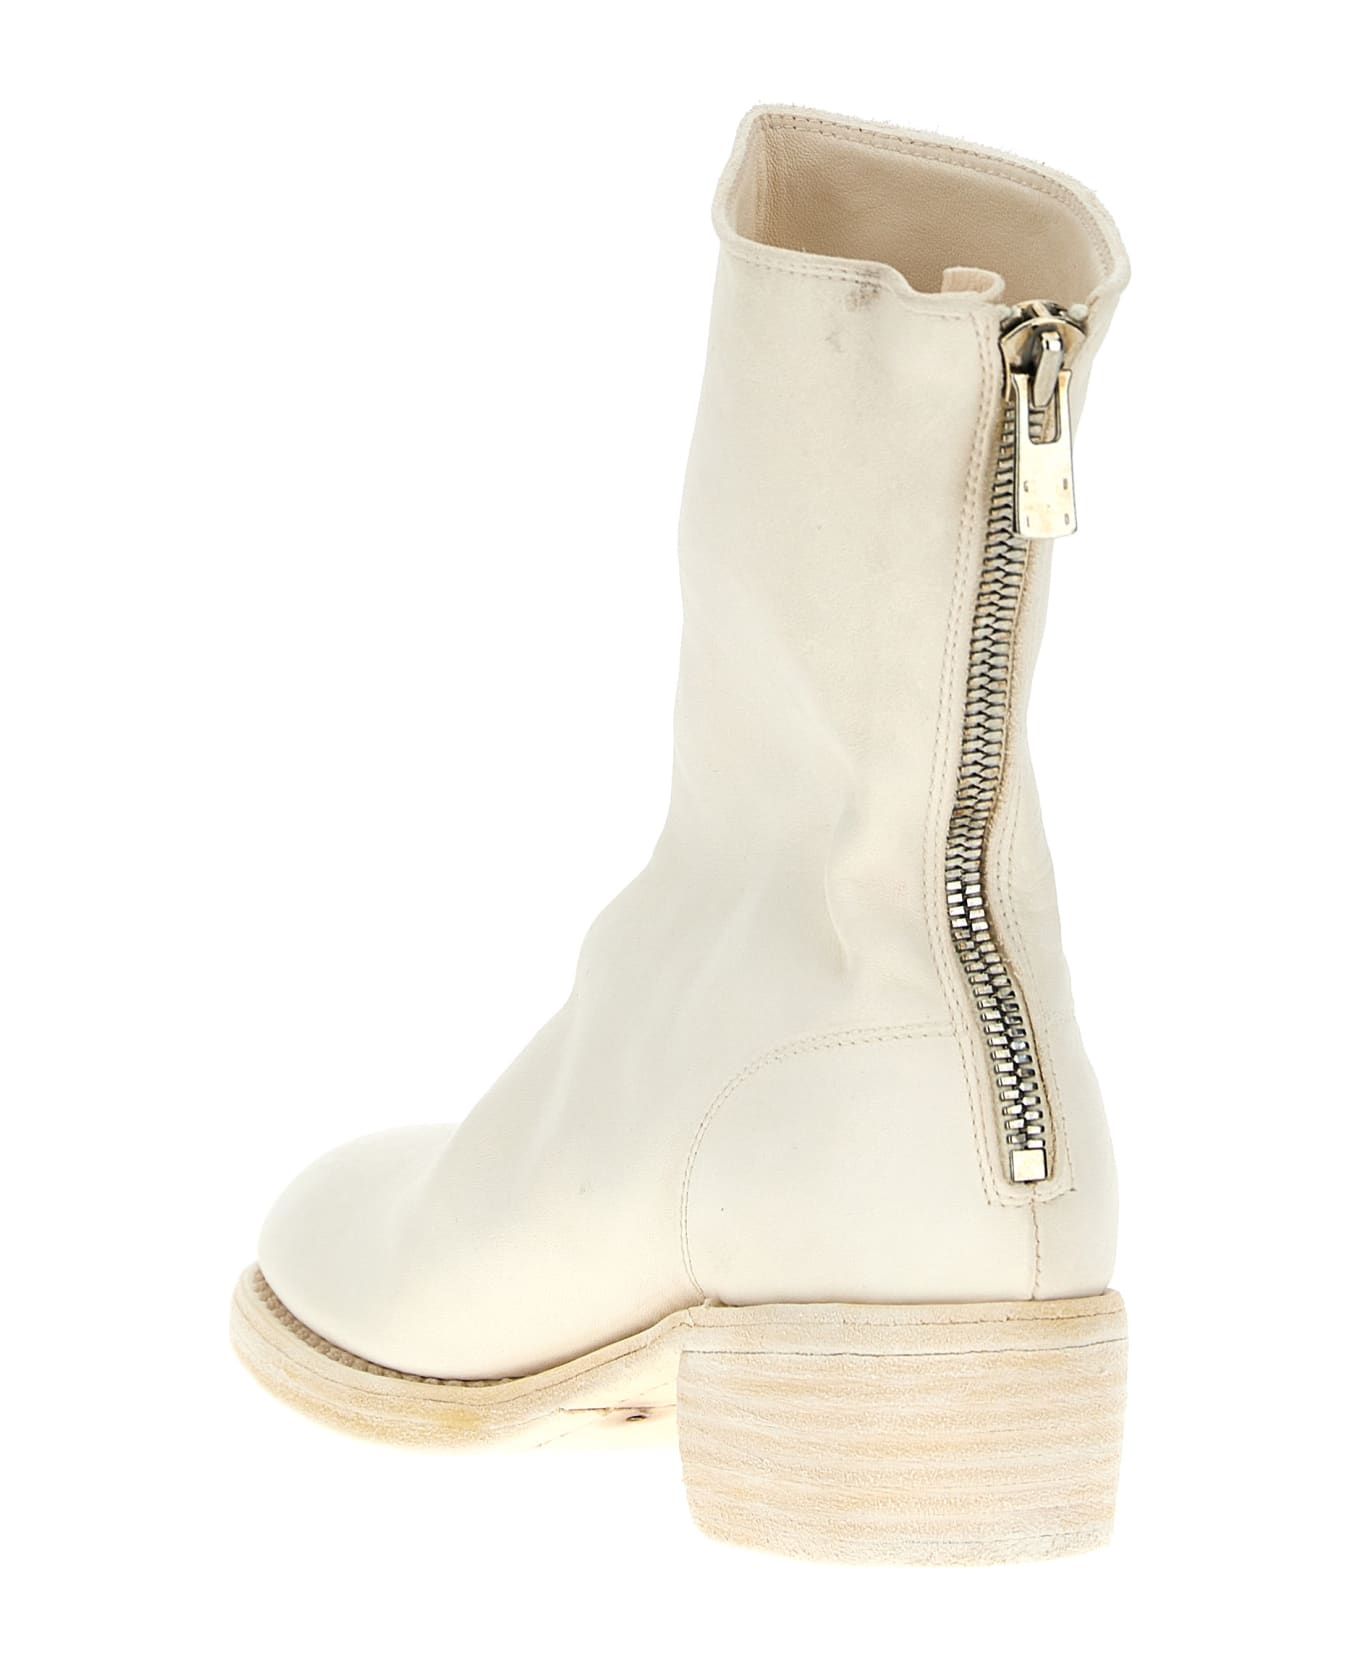 Guidi '788zx' Ankle Boots - White